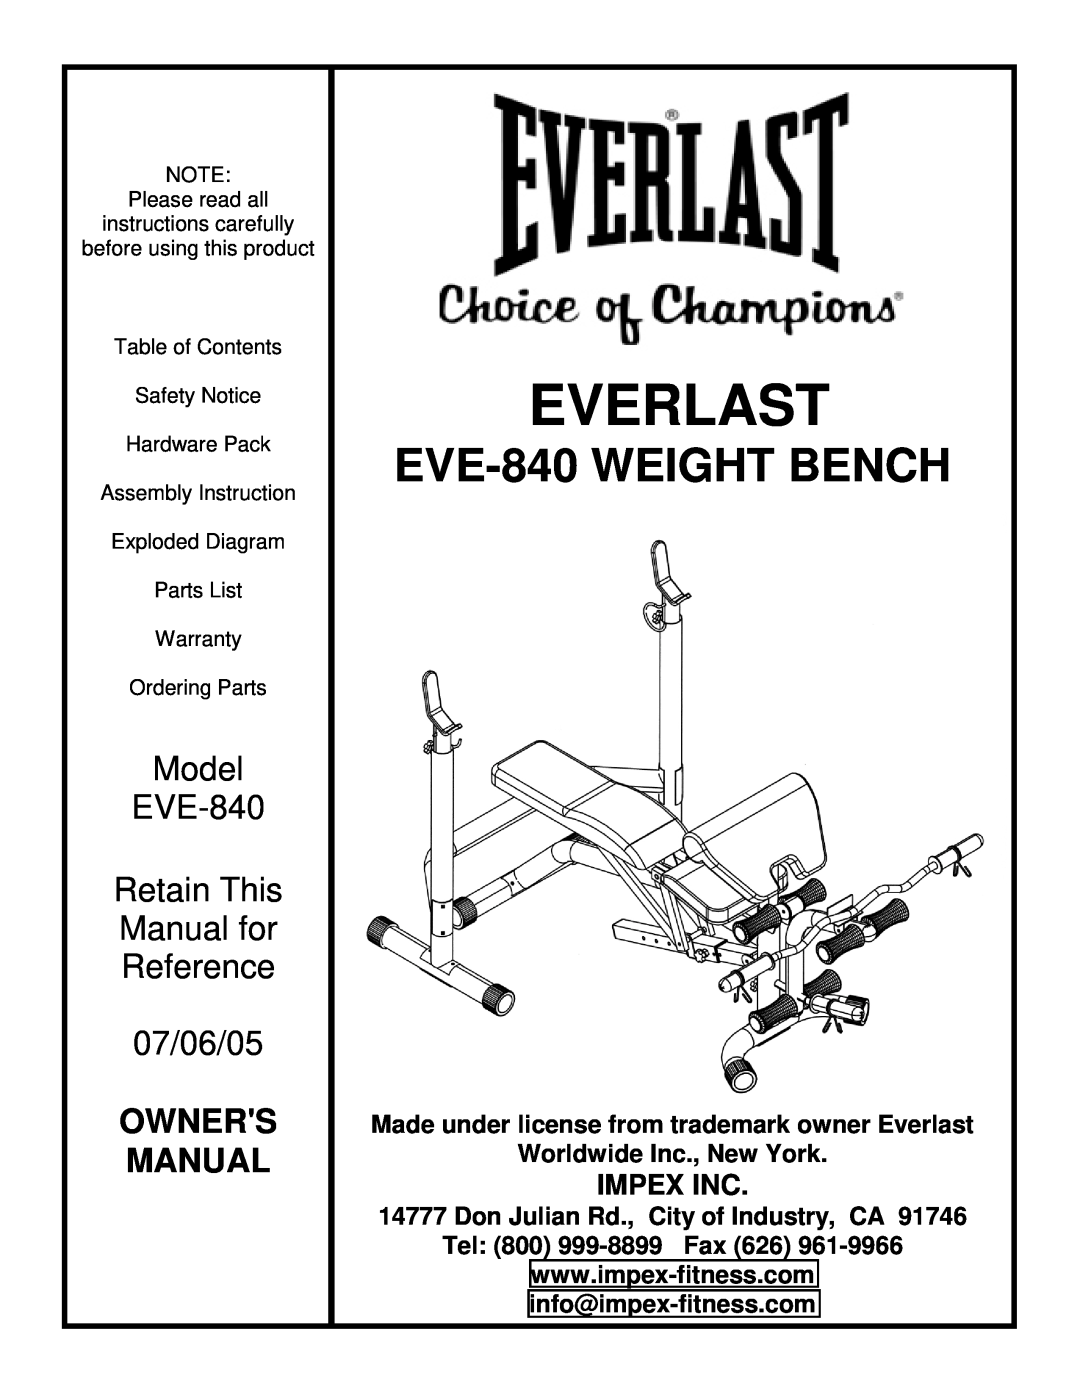 Impex manual Impex Inc, Everlast, EVE-840 WEIGHT BENCH, Model EVE-840 Retain This Manual for Reference 07/06/05 